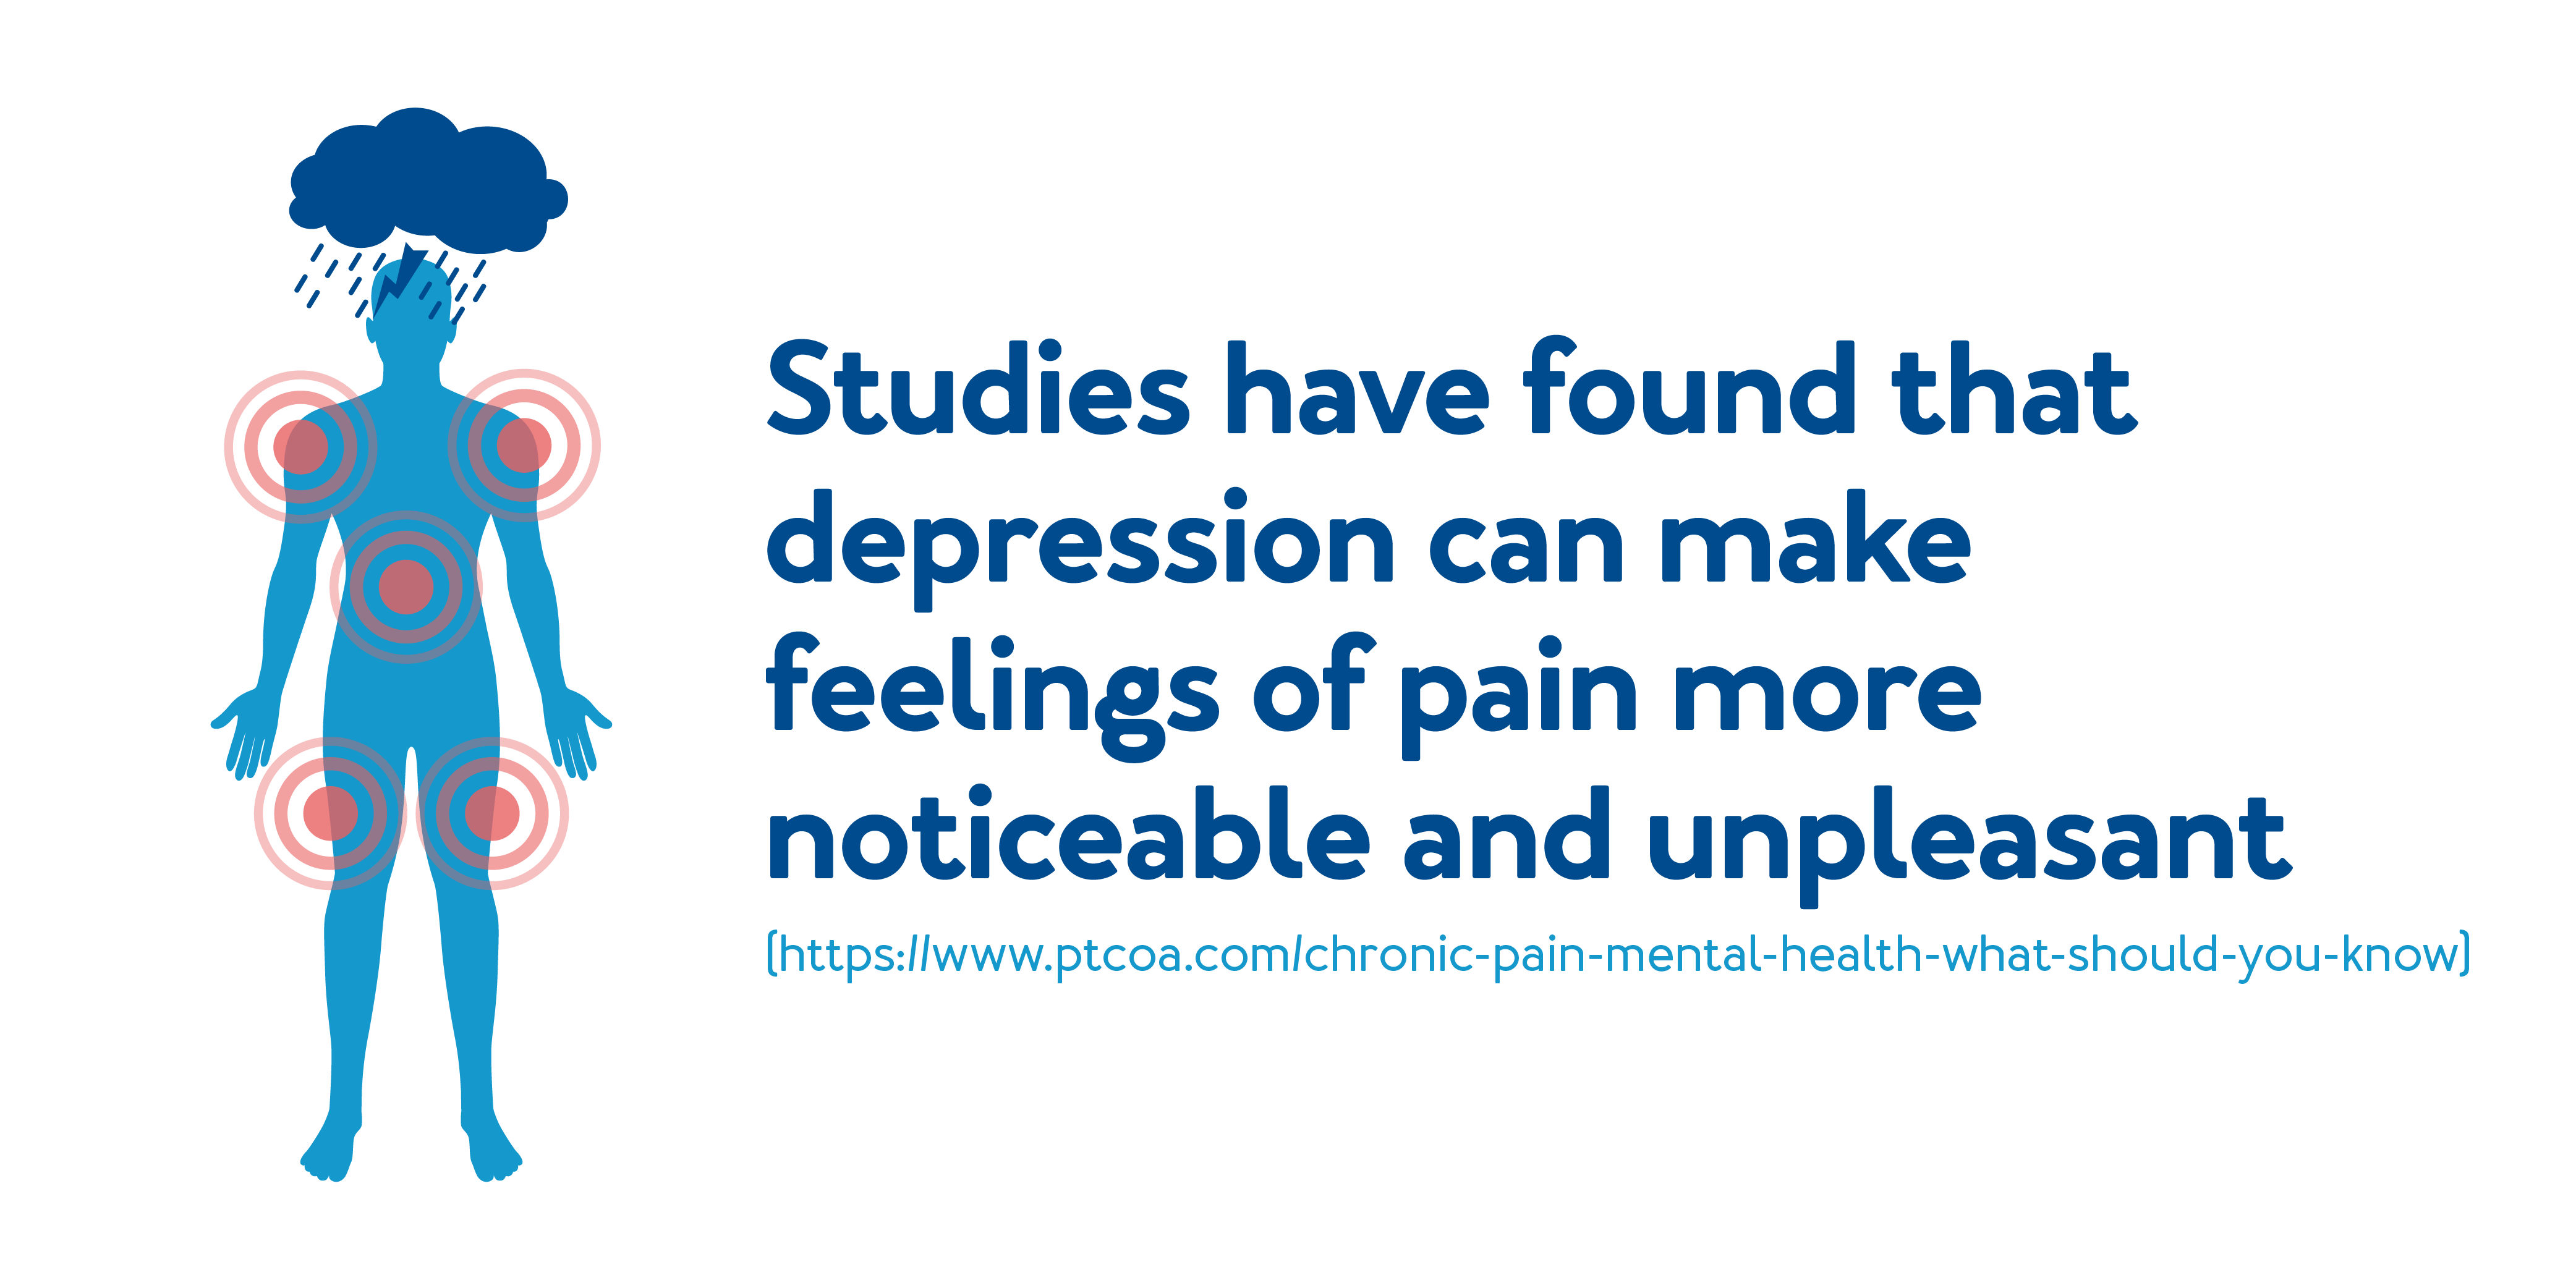 Studies have found that depression can make feelings of pain more noticeable and unpleasant.